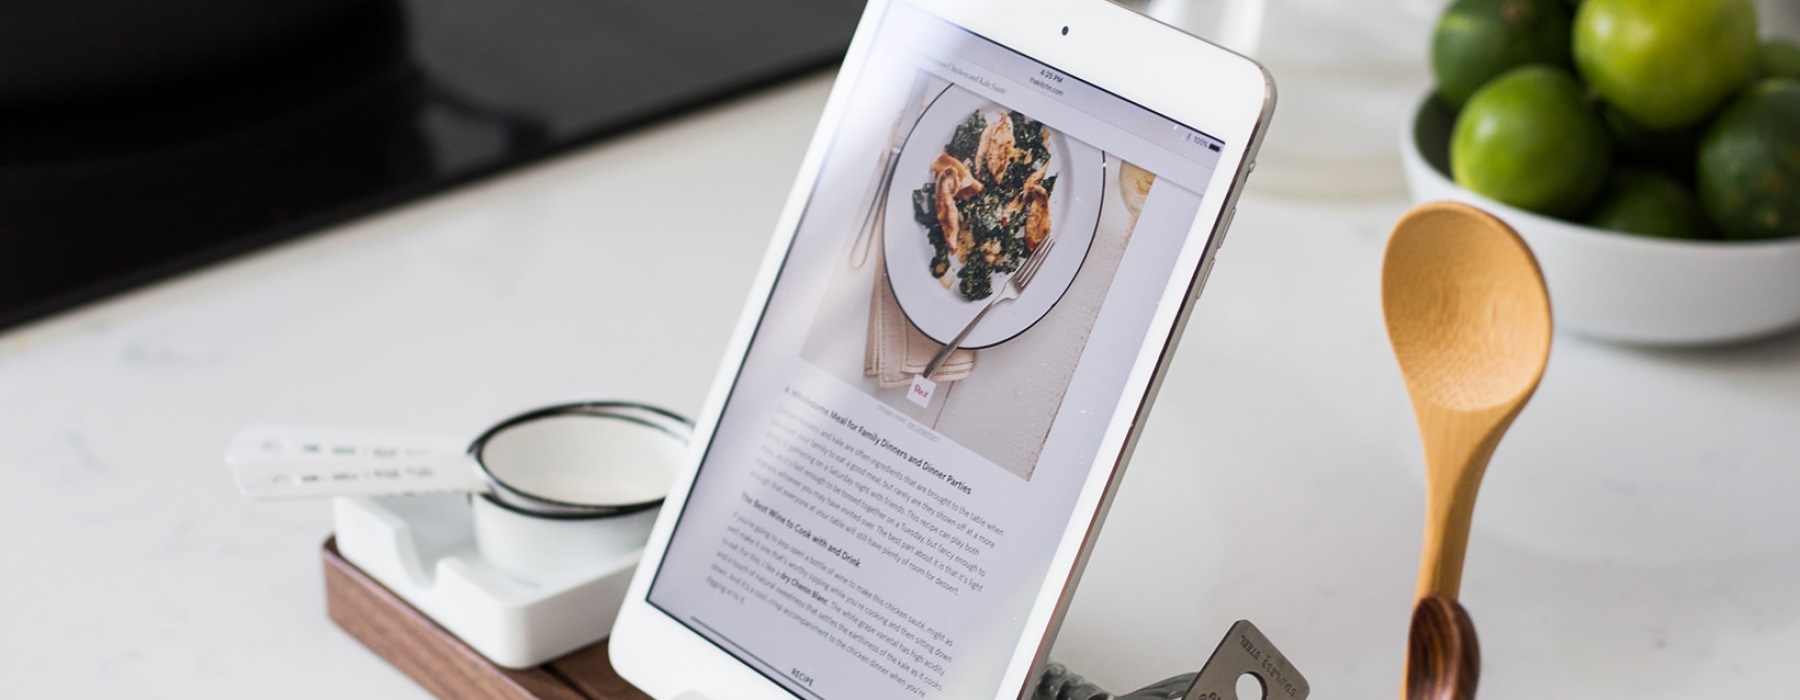 recipe displayed on tablet sitting in dock on kitchen counter